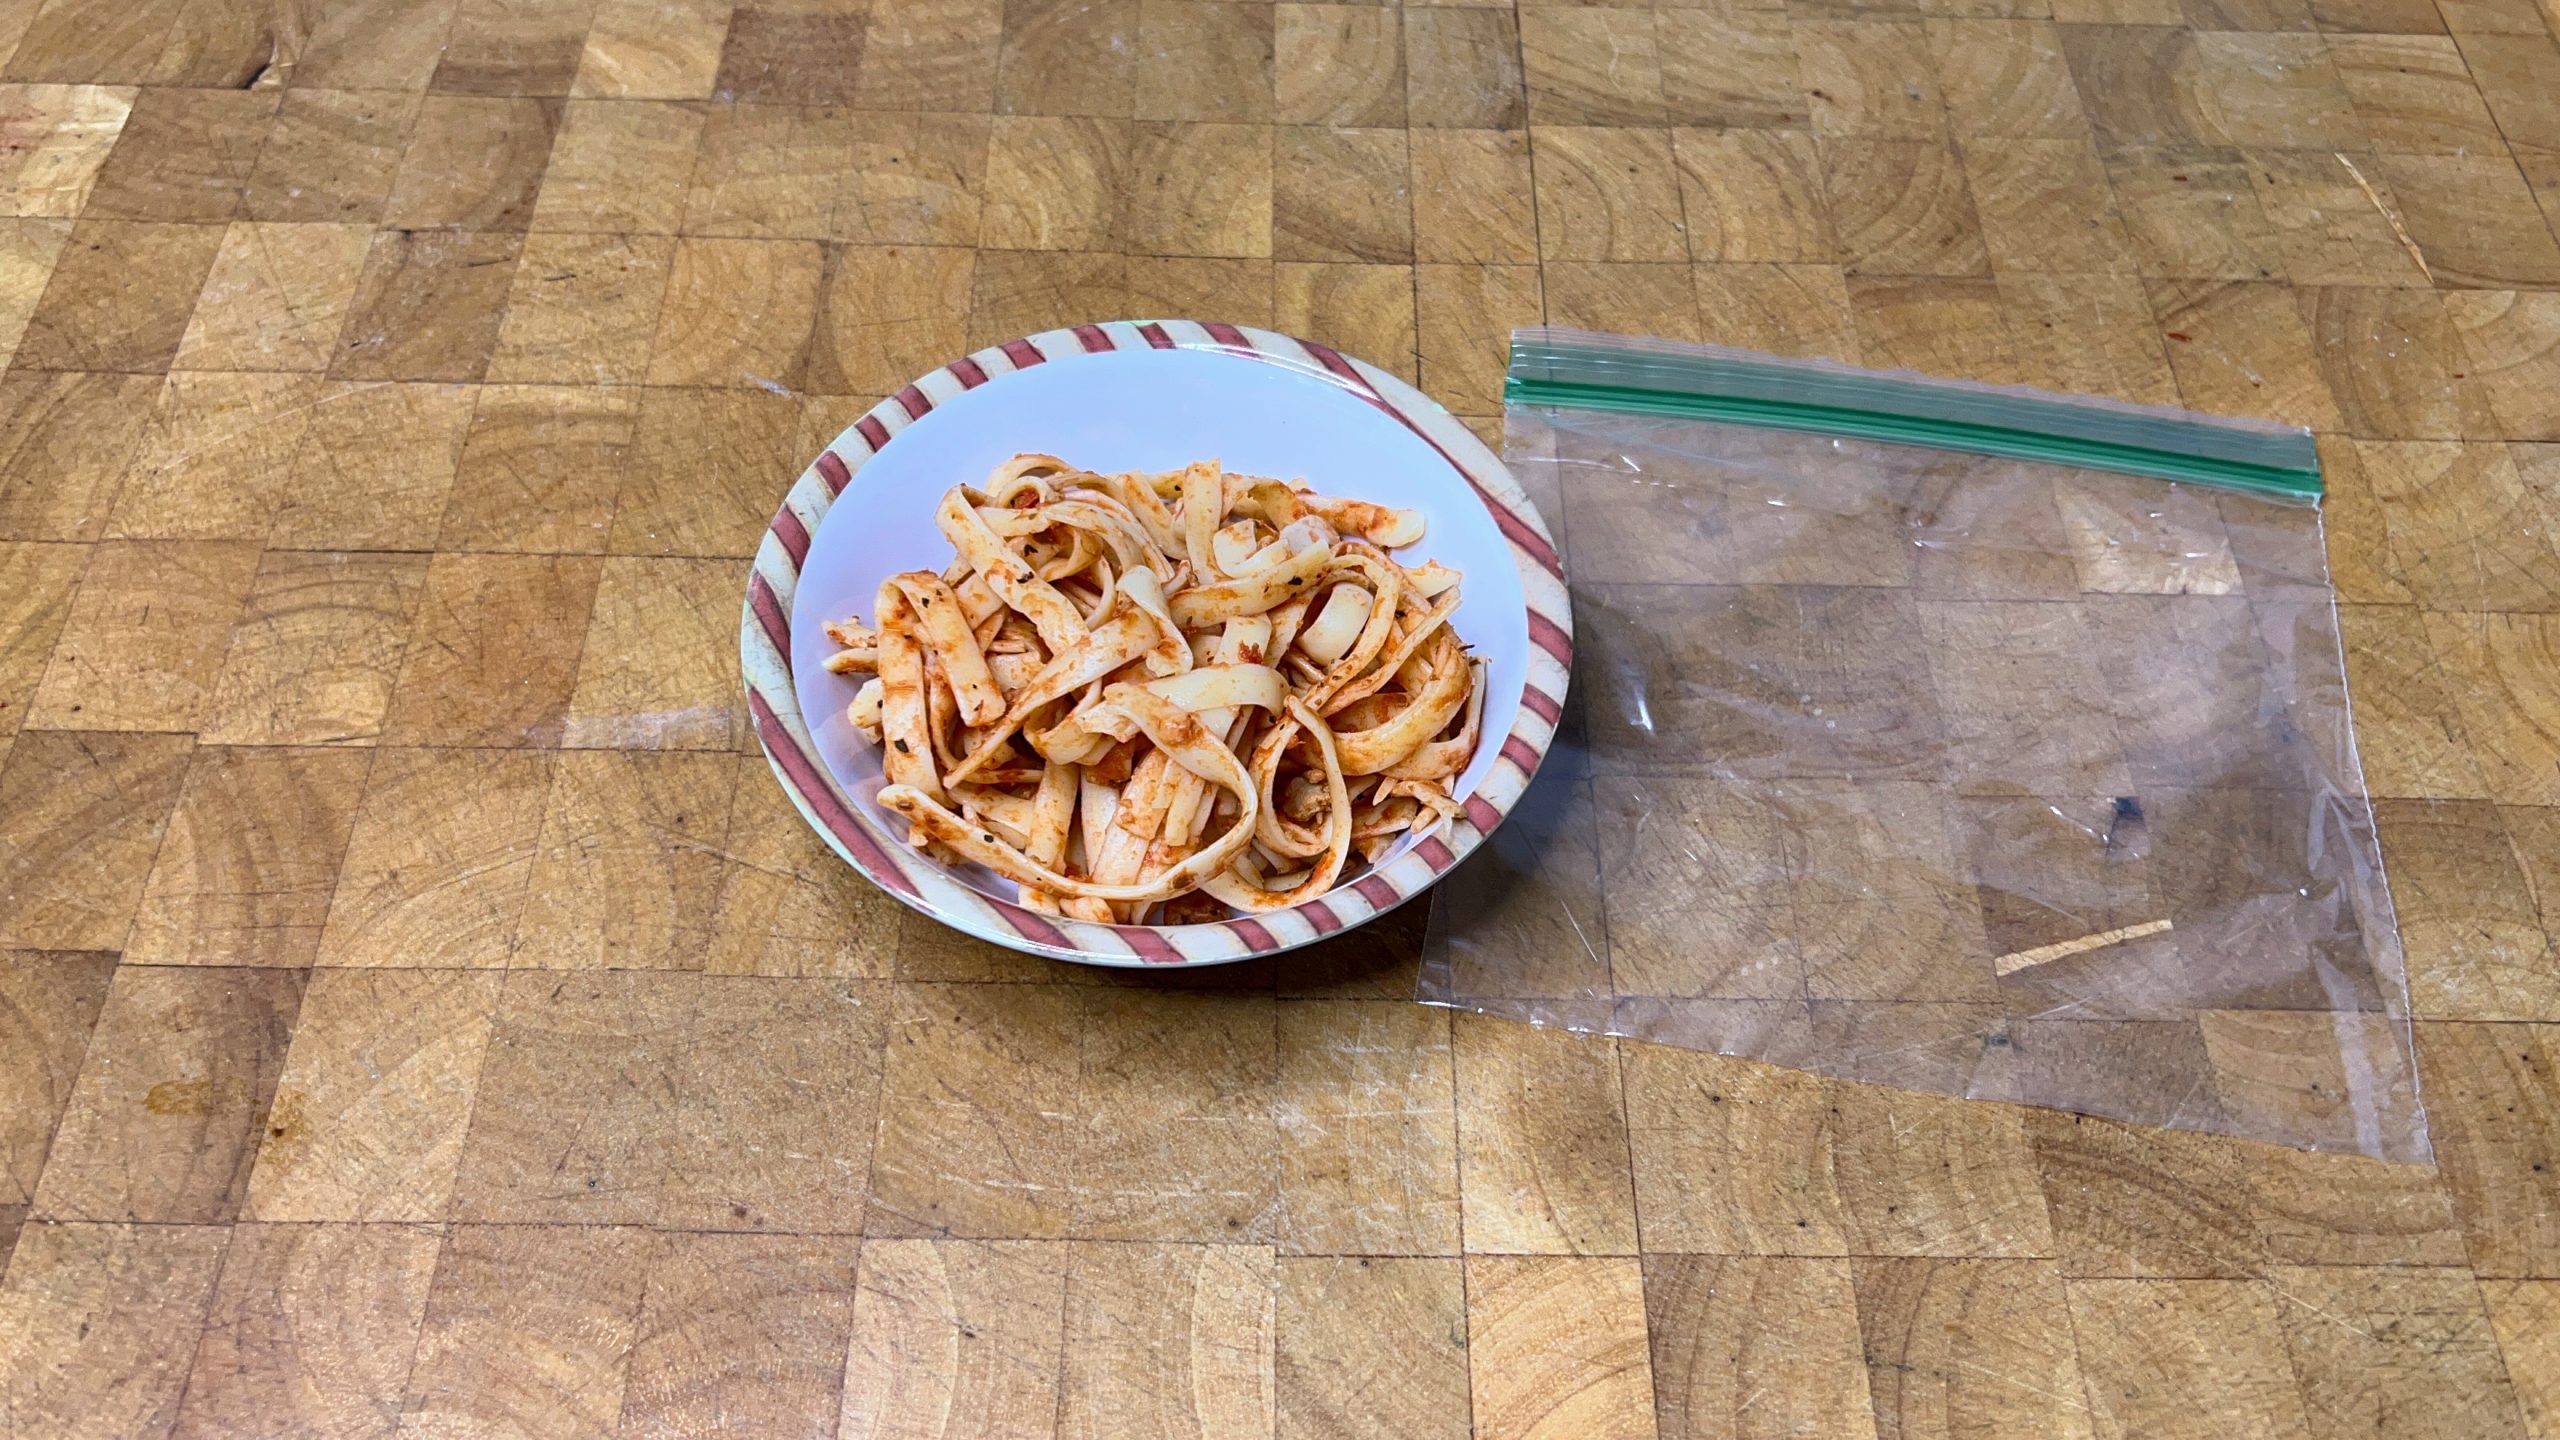 bowl of spaghetti next to an empty freezer bag on a wooden table